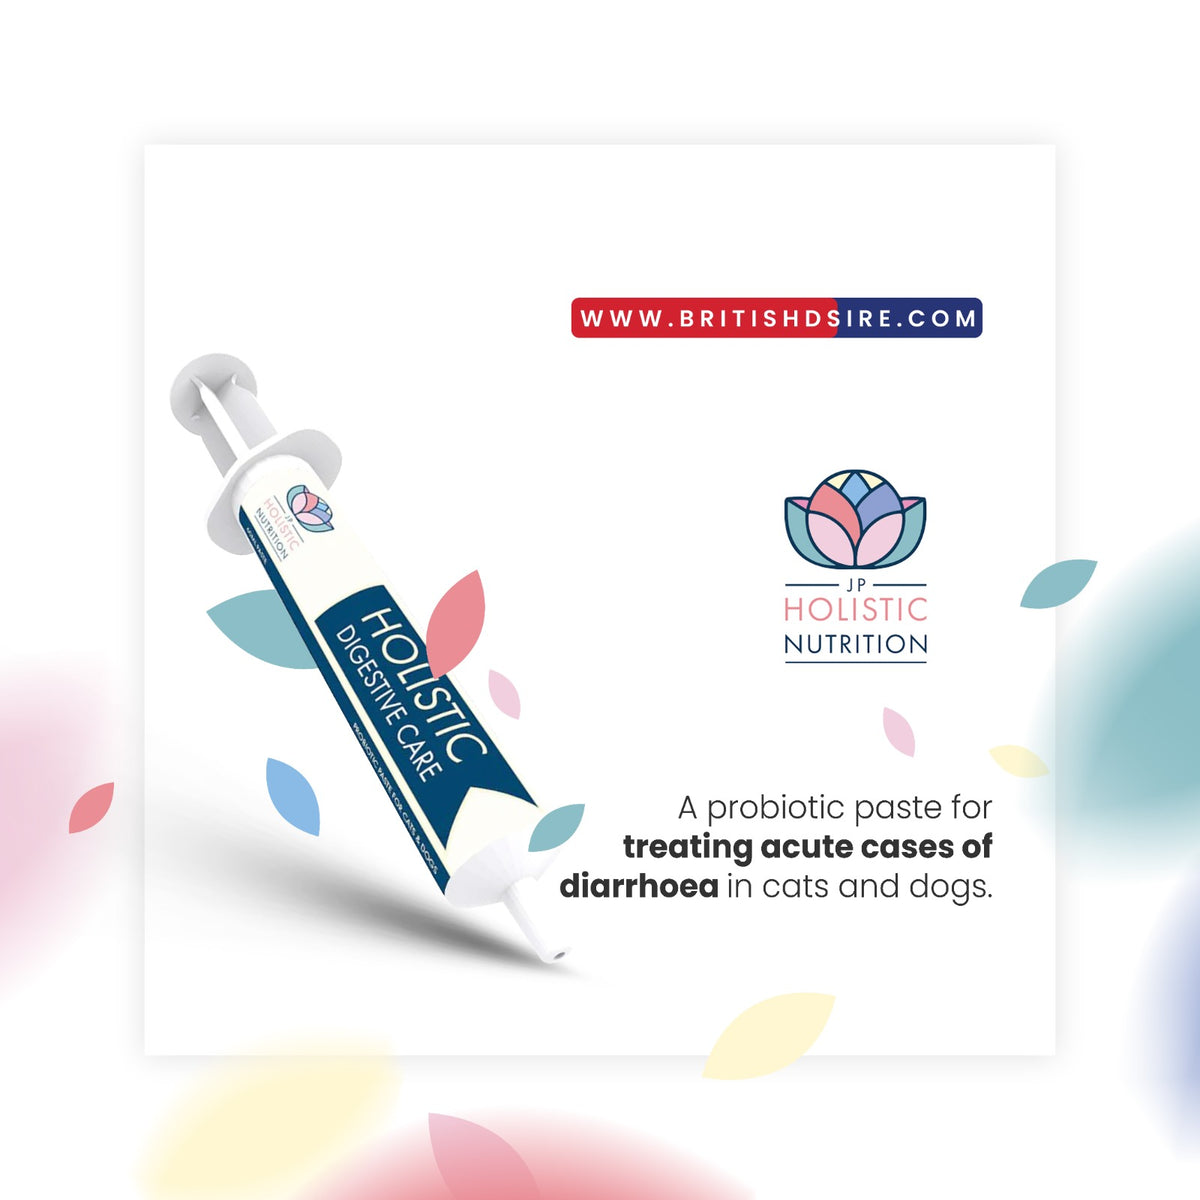 Probiotic paste for dogs and cats